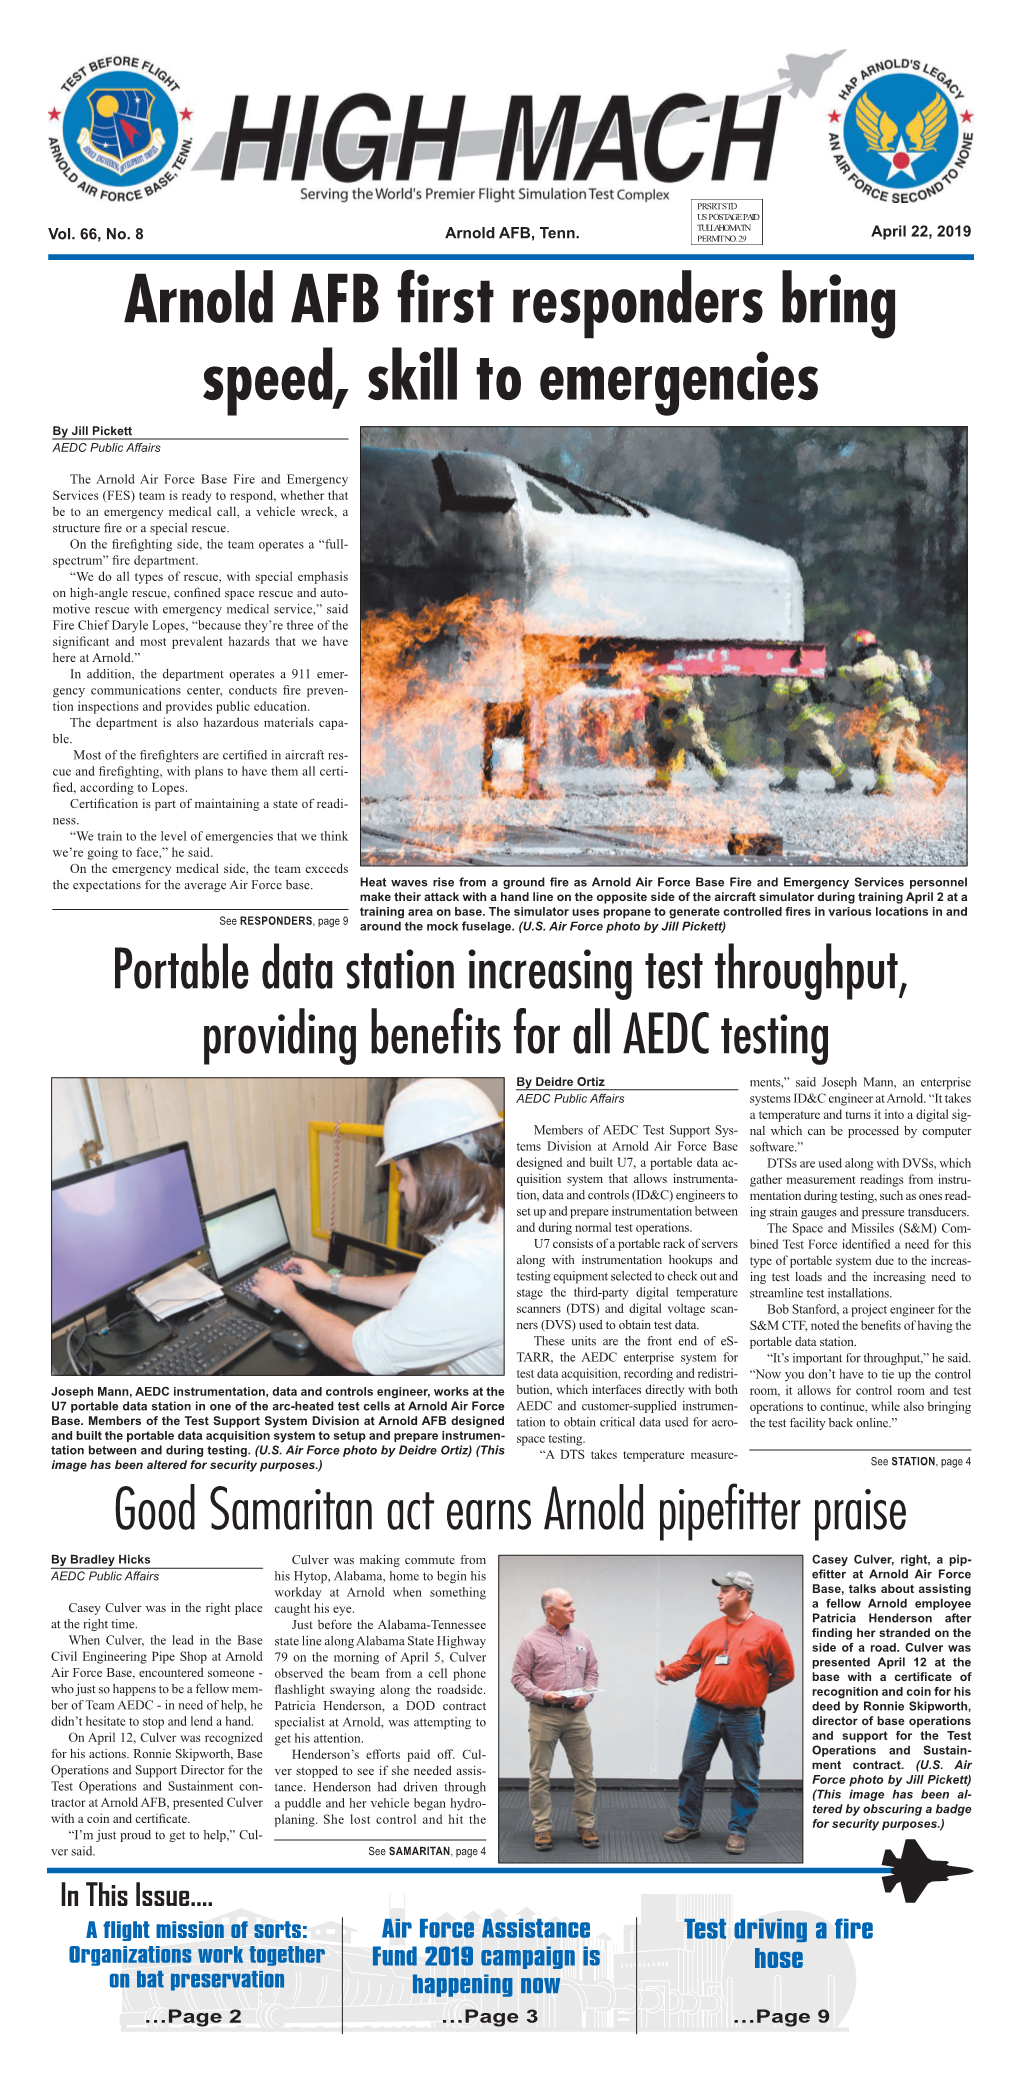 Arnold AFB First Responders Bring Speed, Skill to Emergencies by Jill Pickett AEDC Public Affairs